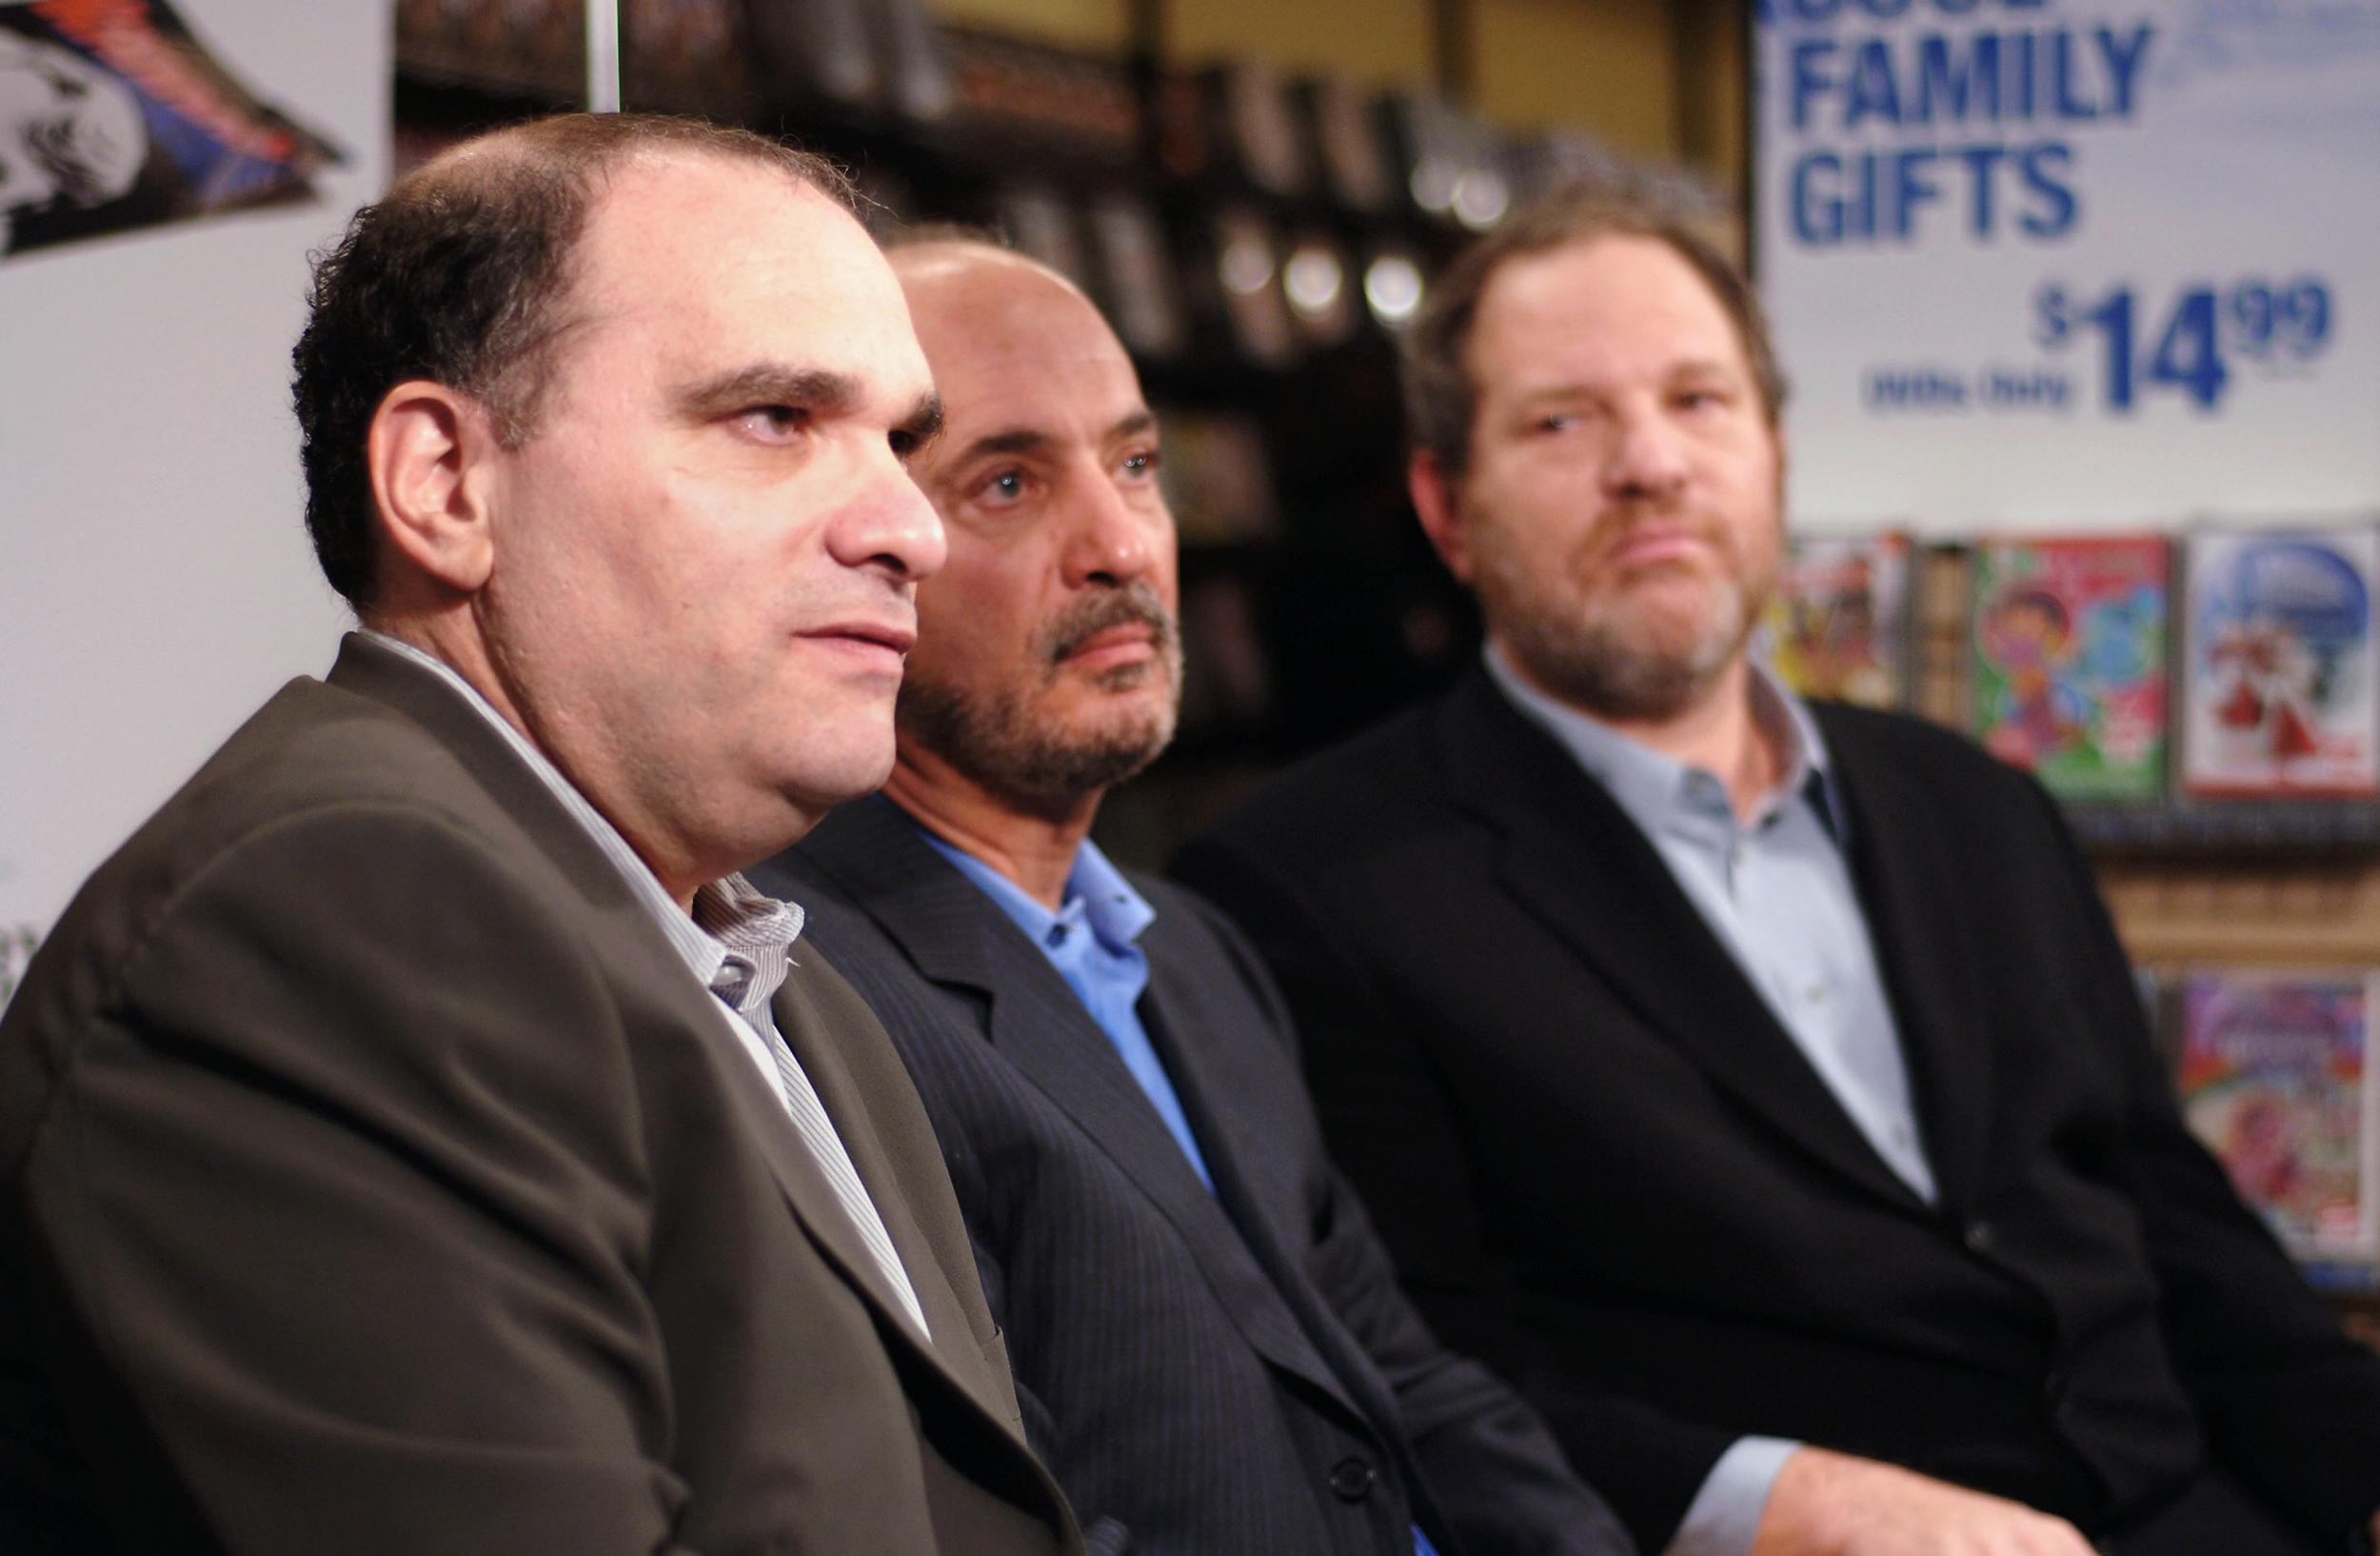 Bob Weinstein, Blockbuster Chairman and CEO John Antioco, and Harvey Weinstein appear together at a press conference in 2006. Bob Weinstein says he was not aware of the 'extent' of his older brother's alleged actions and calls him 'sick and depraved'